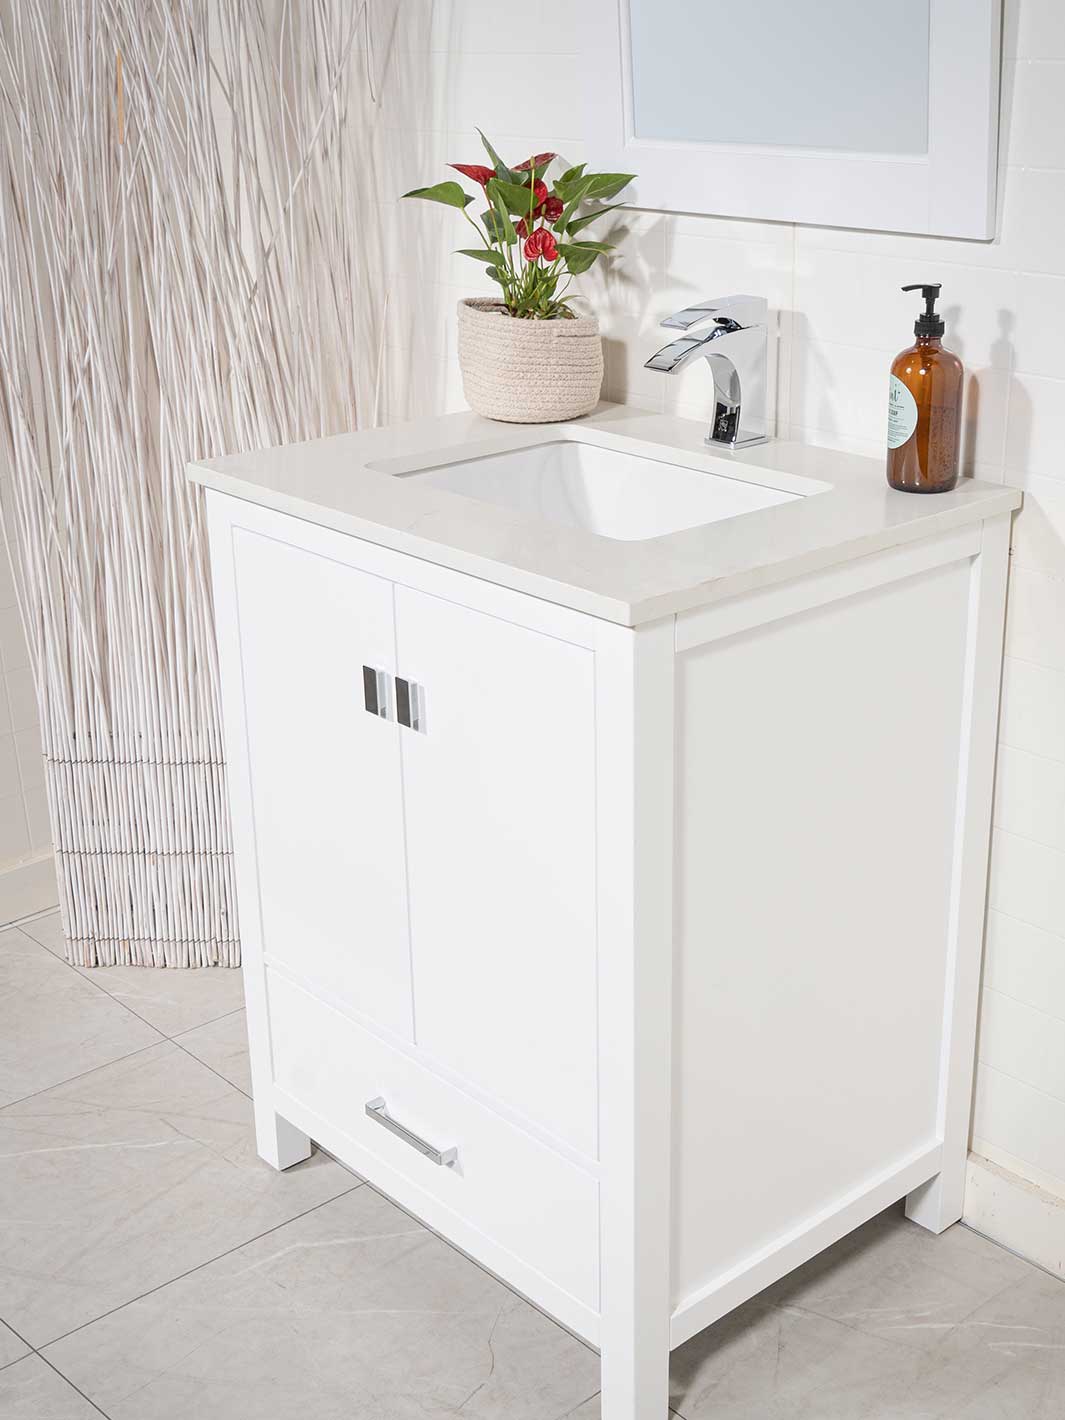 28 inch white bathroom cabinet with white quartz counter and chrome faucet